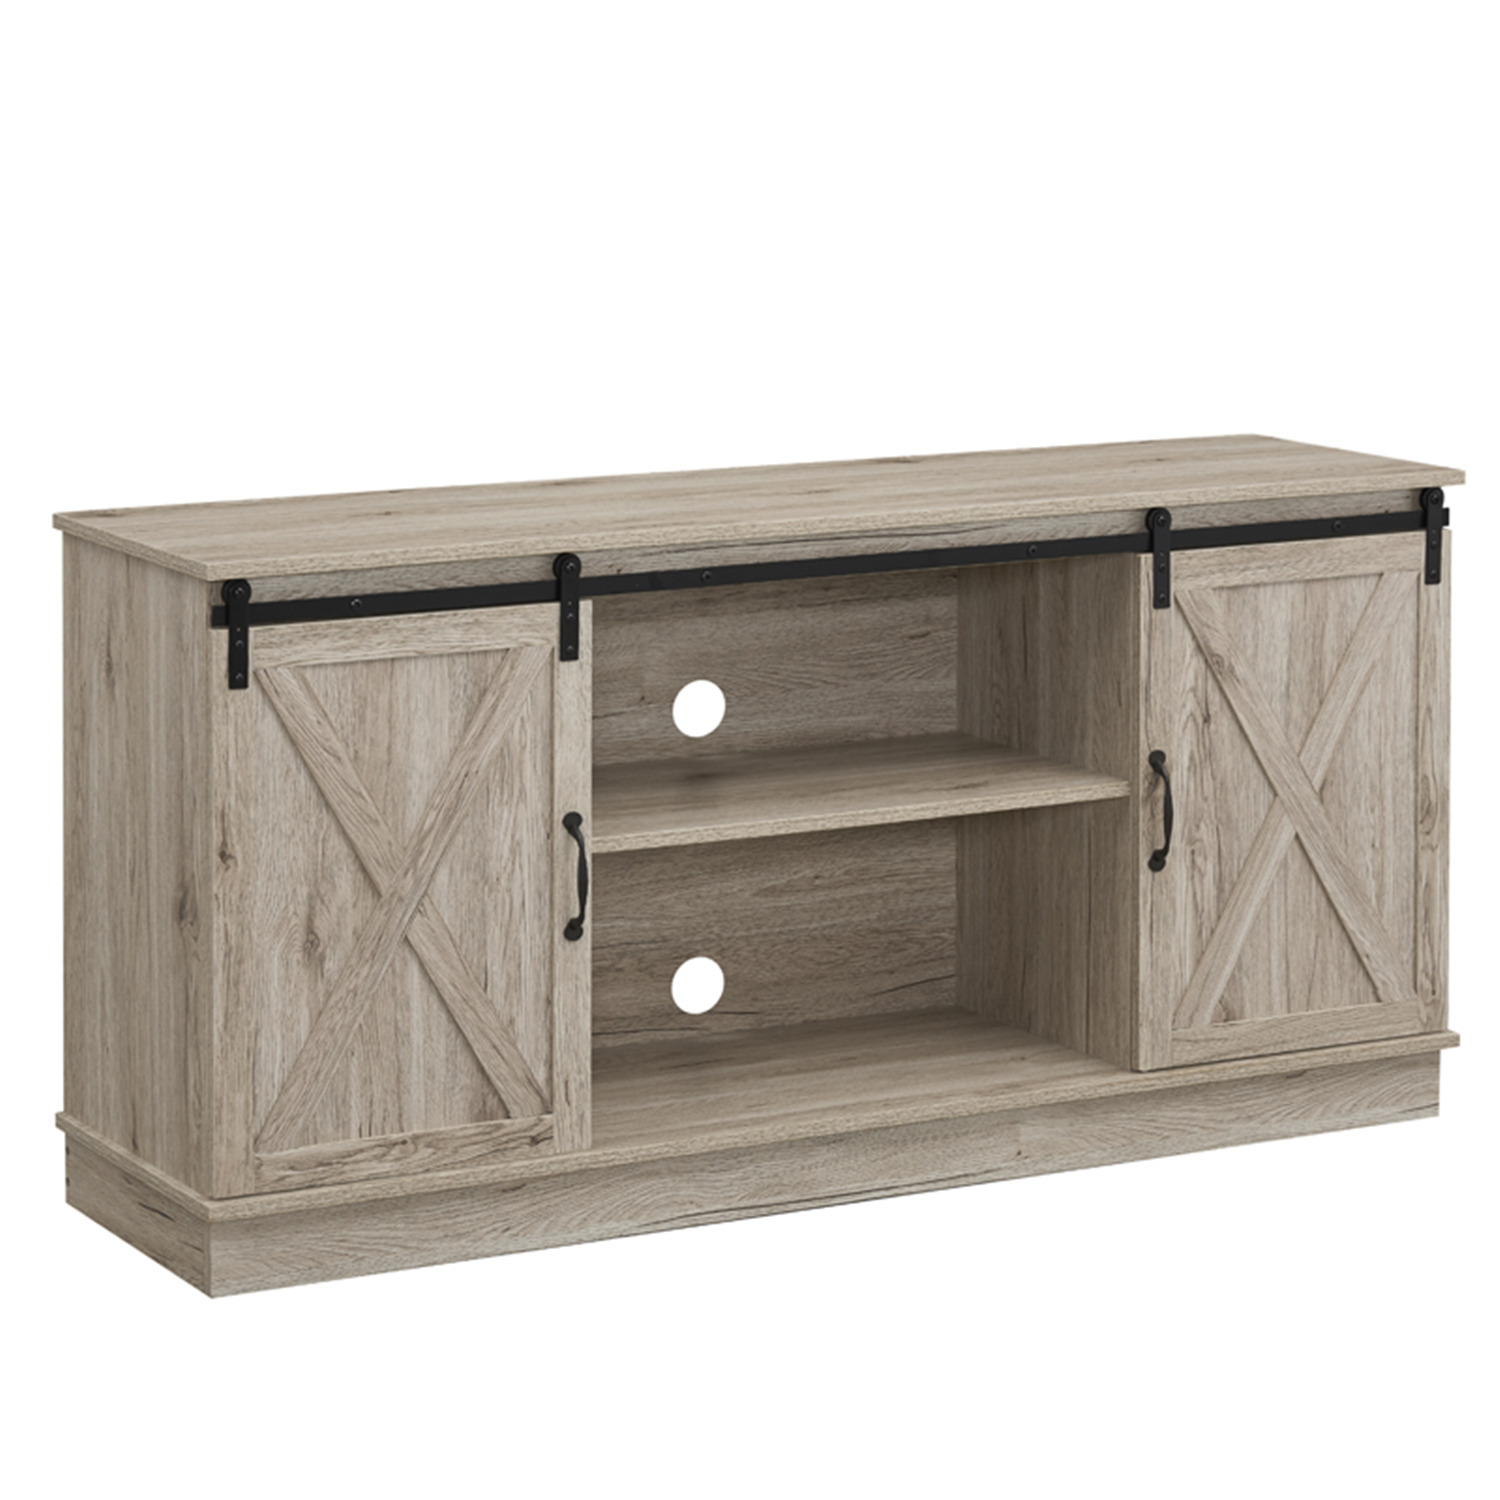 Naomi Home Rylee Farmhouse Style 60" TV Console Cabinet With Sliding Barn Doors